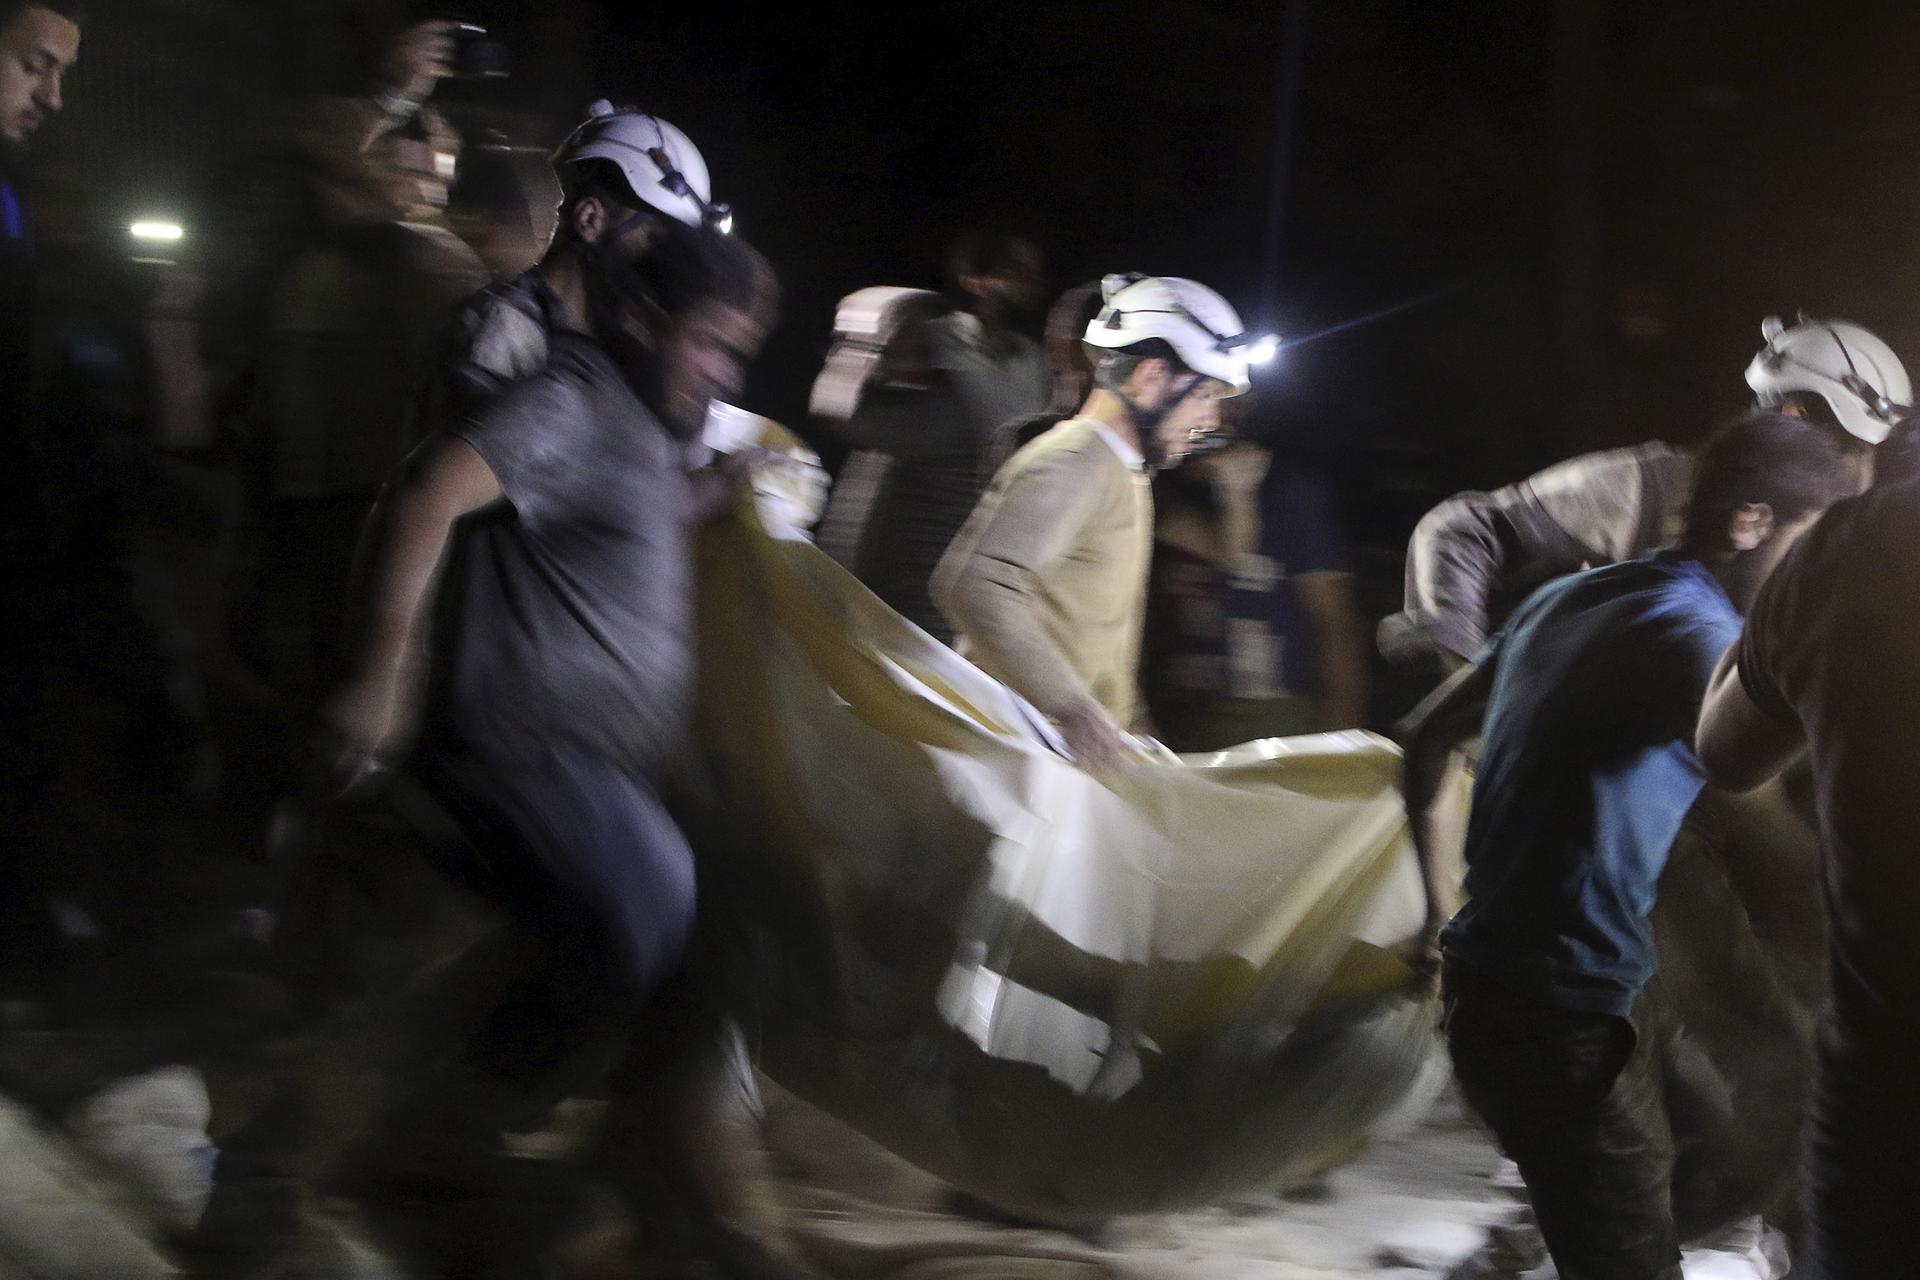 Civil defense members carry a casualty after an airstrike in the rebel held area of al-Sukari in Aleppo.